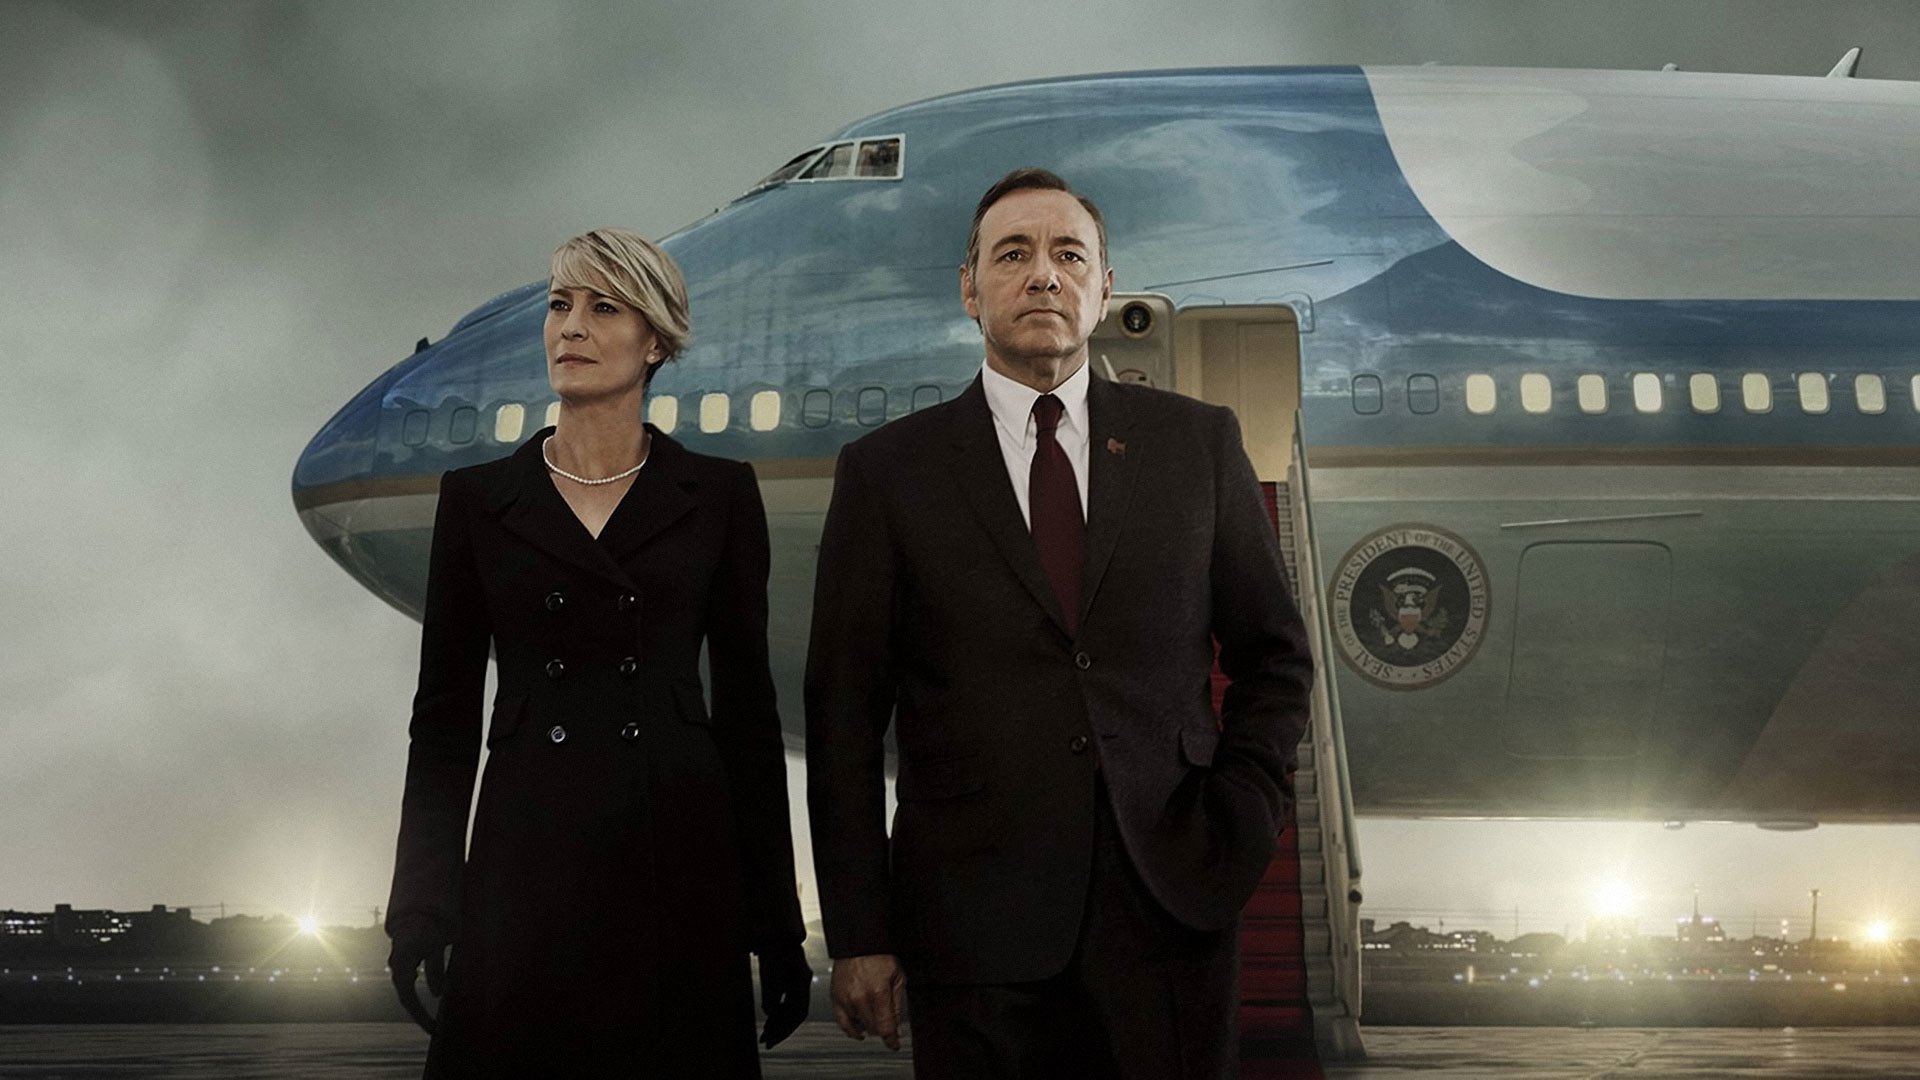 Wallpaper House of cards, couple, TV series, airplane